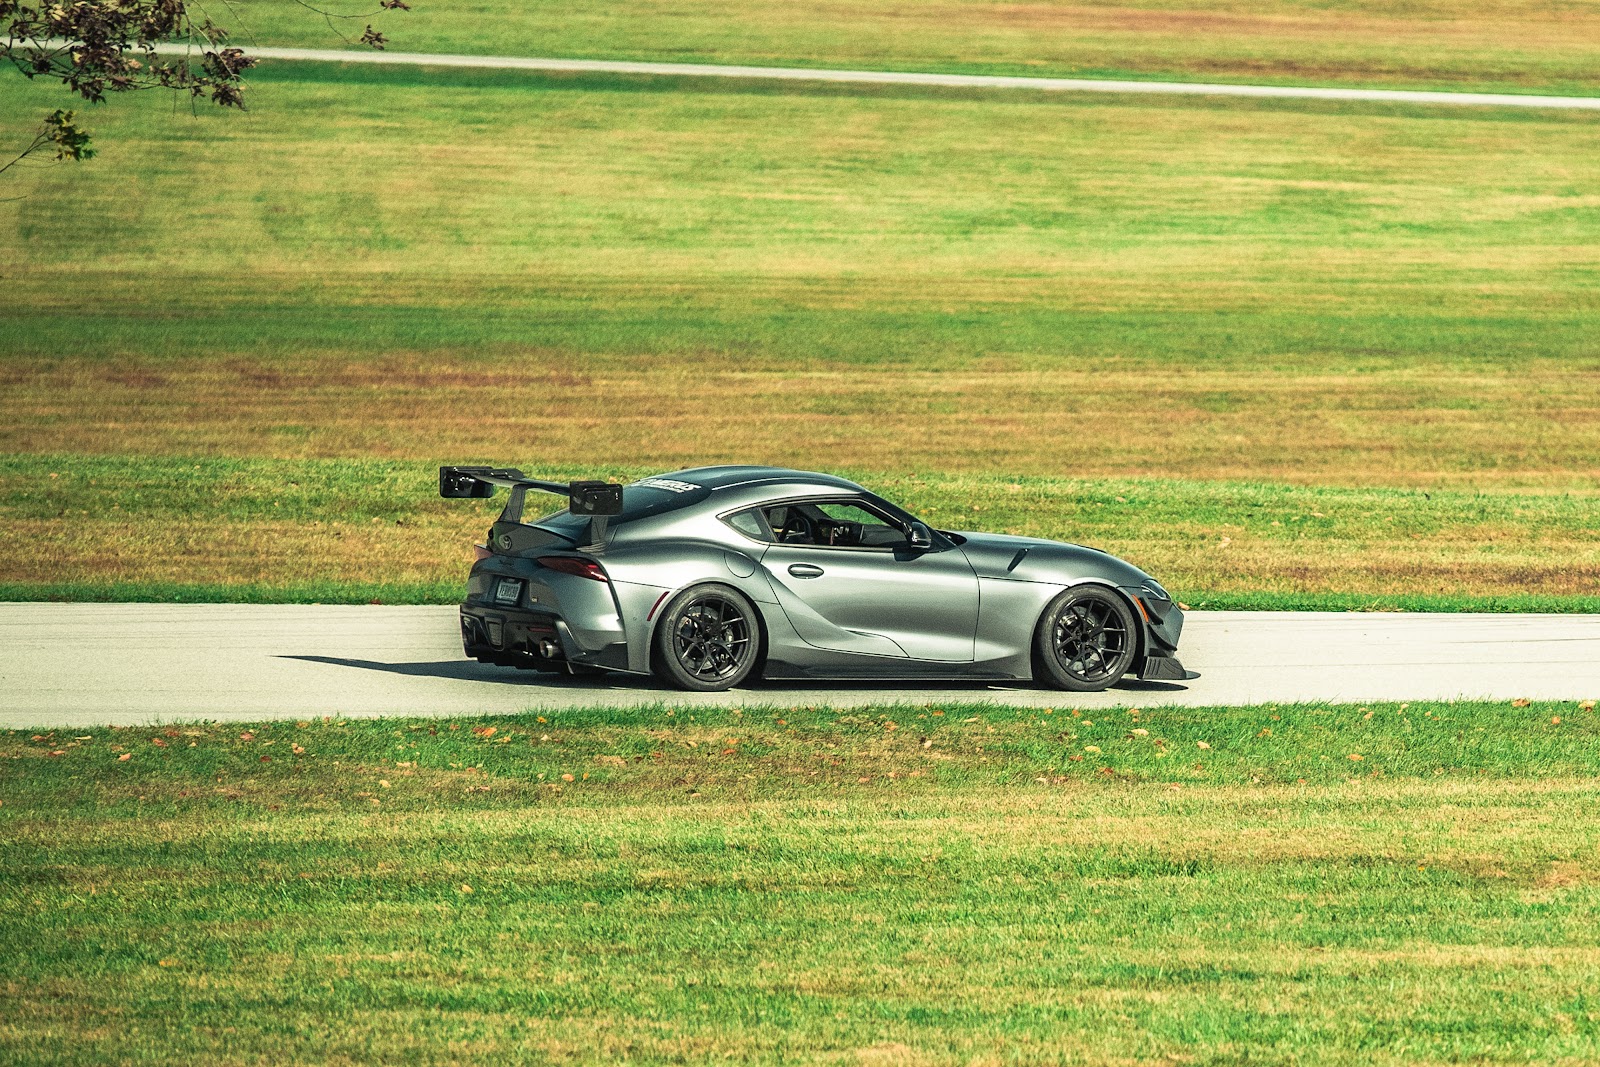 Toyota Supra on track with full aerodynamic package